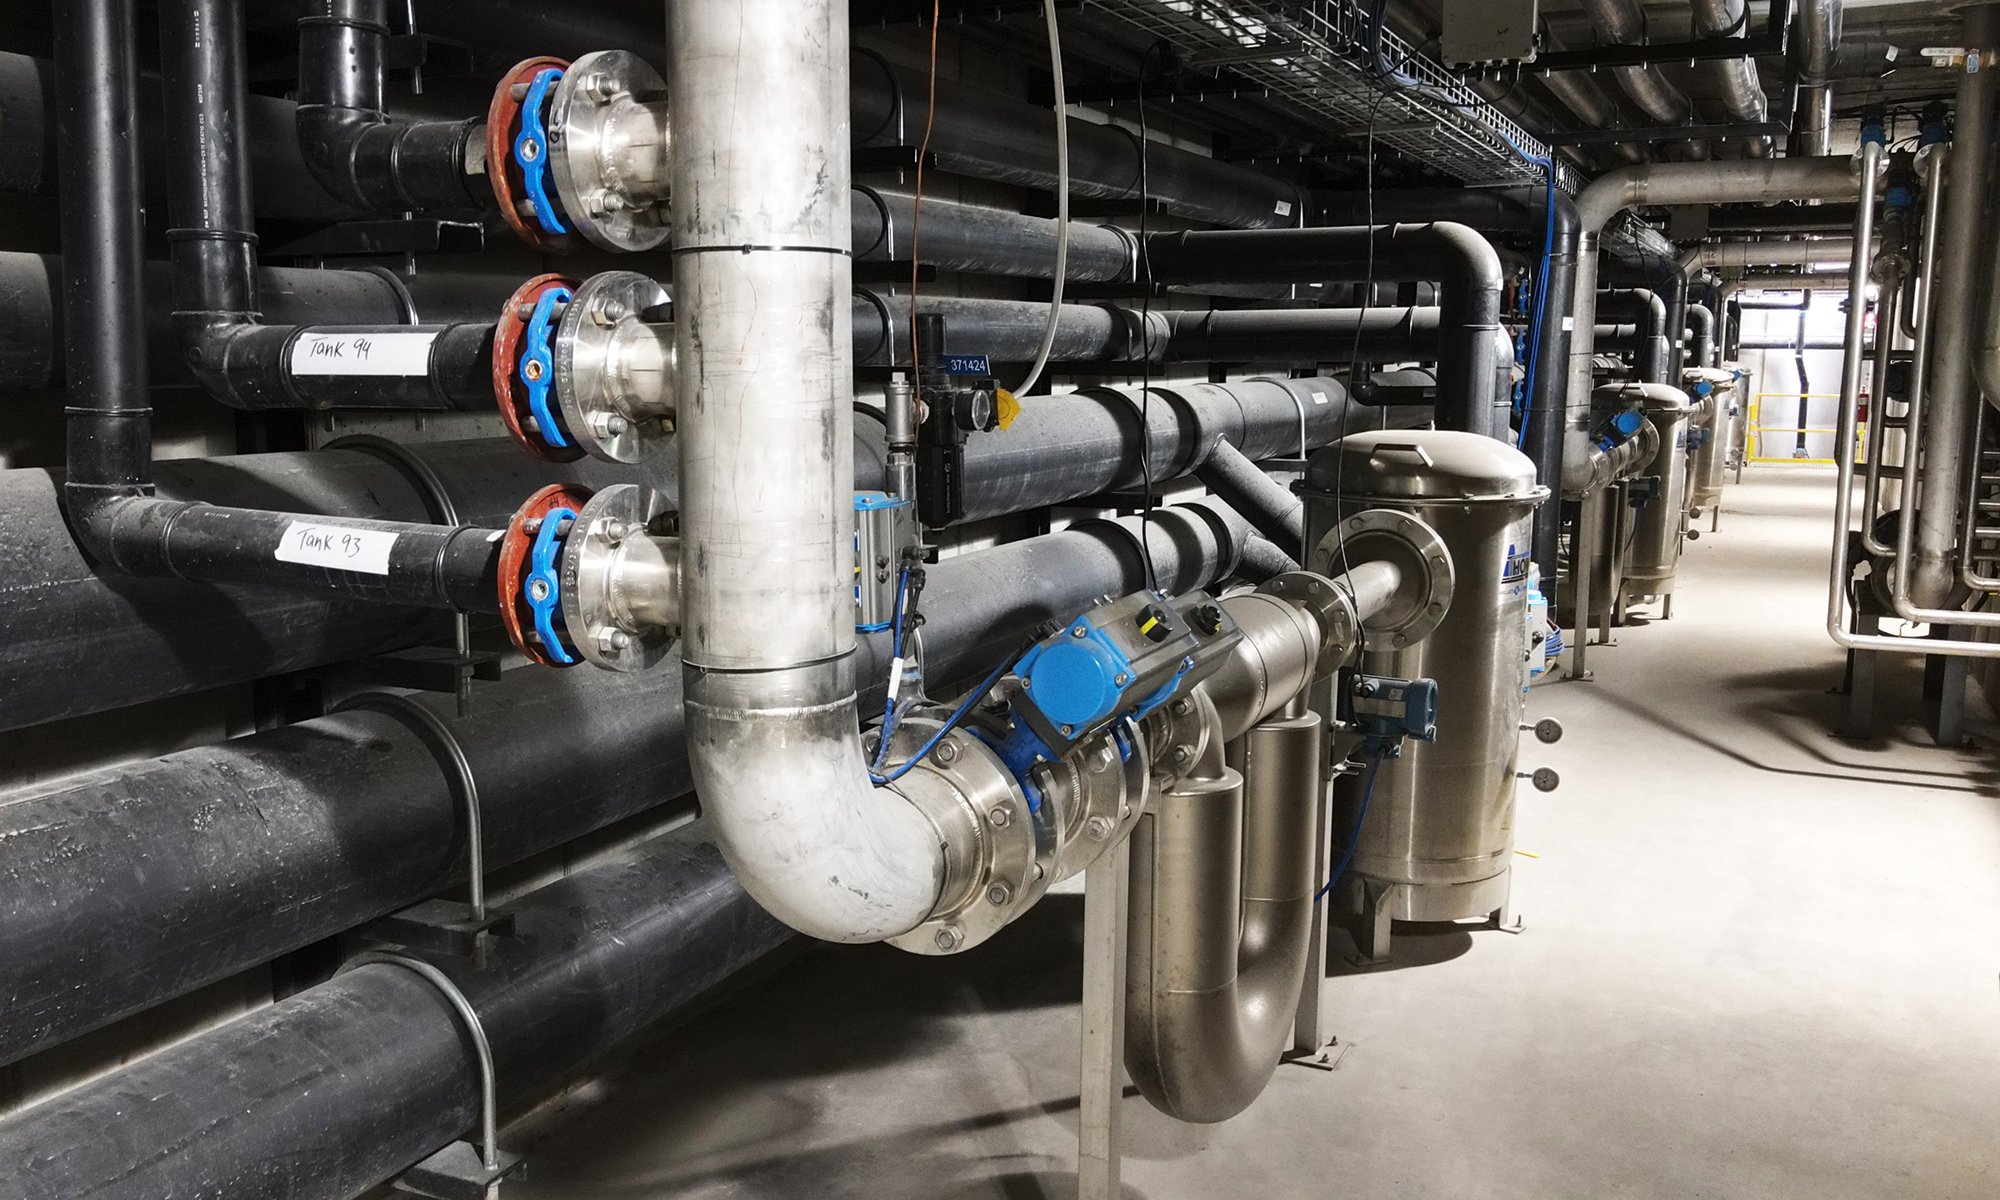  Two tunnels beneath the building house each bay’s plumbing including flow meters, strainers, valves, and air solenoid panels to ensure all products are delivered accurately and quickly. 